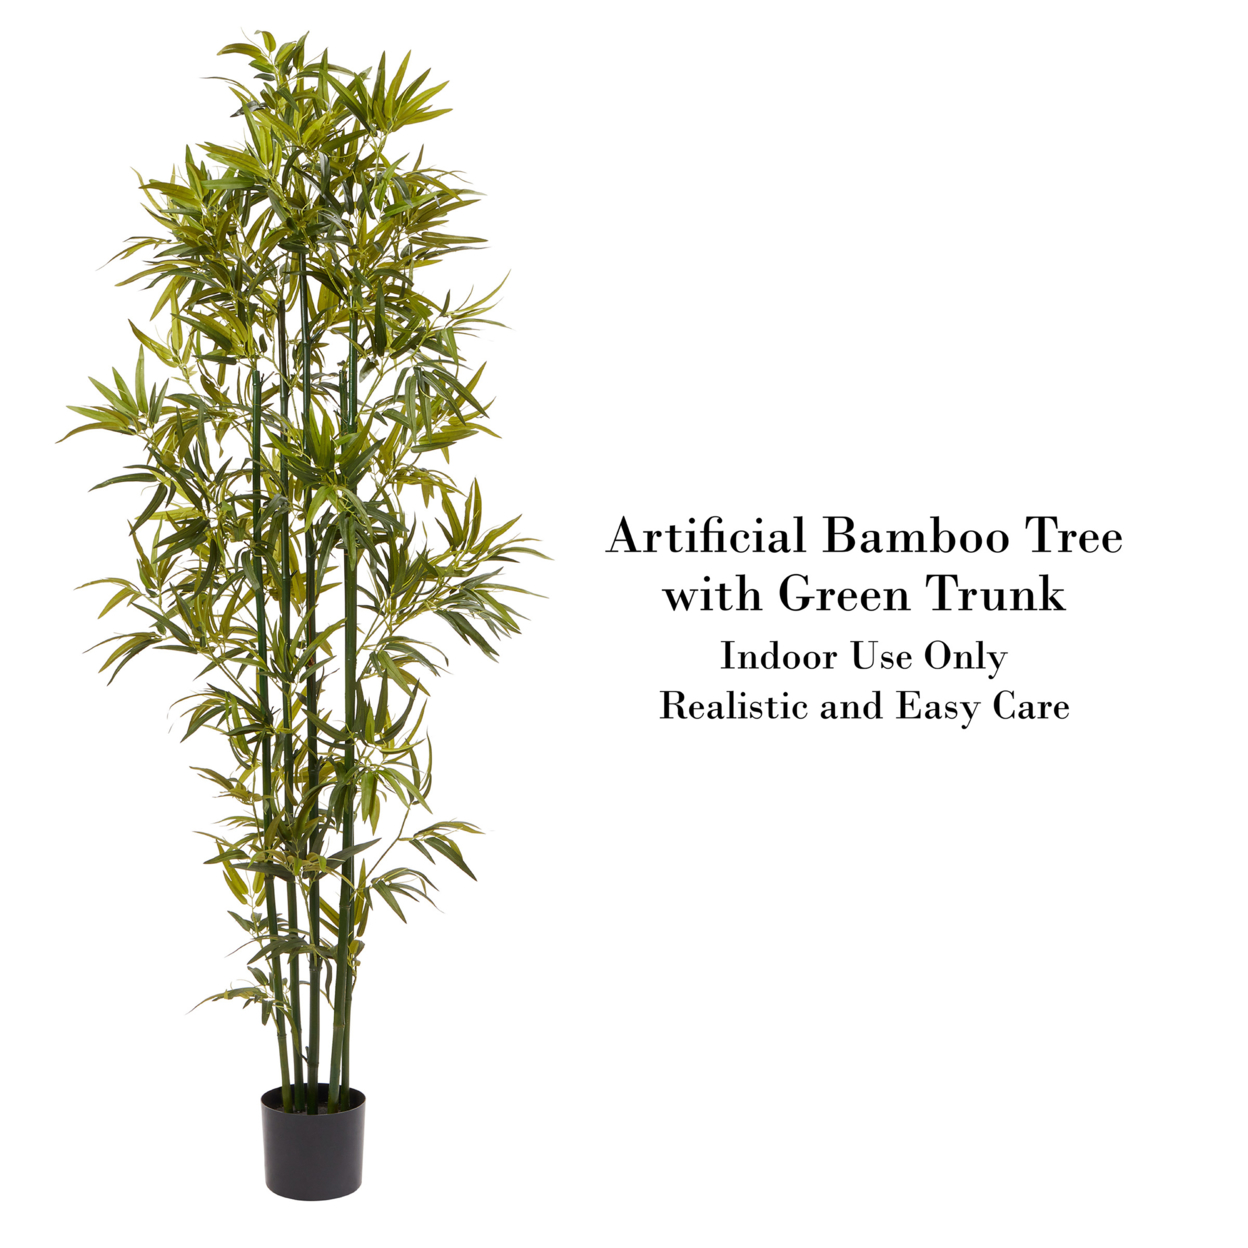 6 Ft. Artificial Bamboo Tall Faux Potted Indoor Floor Plant For Home Large And Lifelike By Pure Garden (Green Trunk)